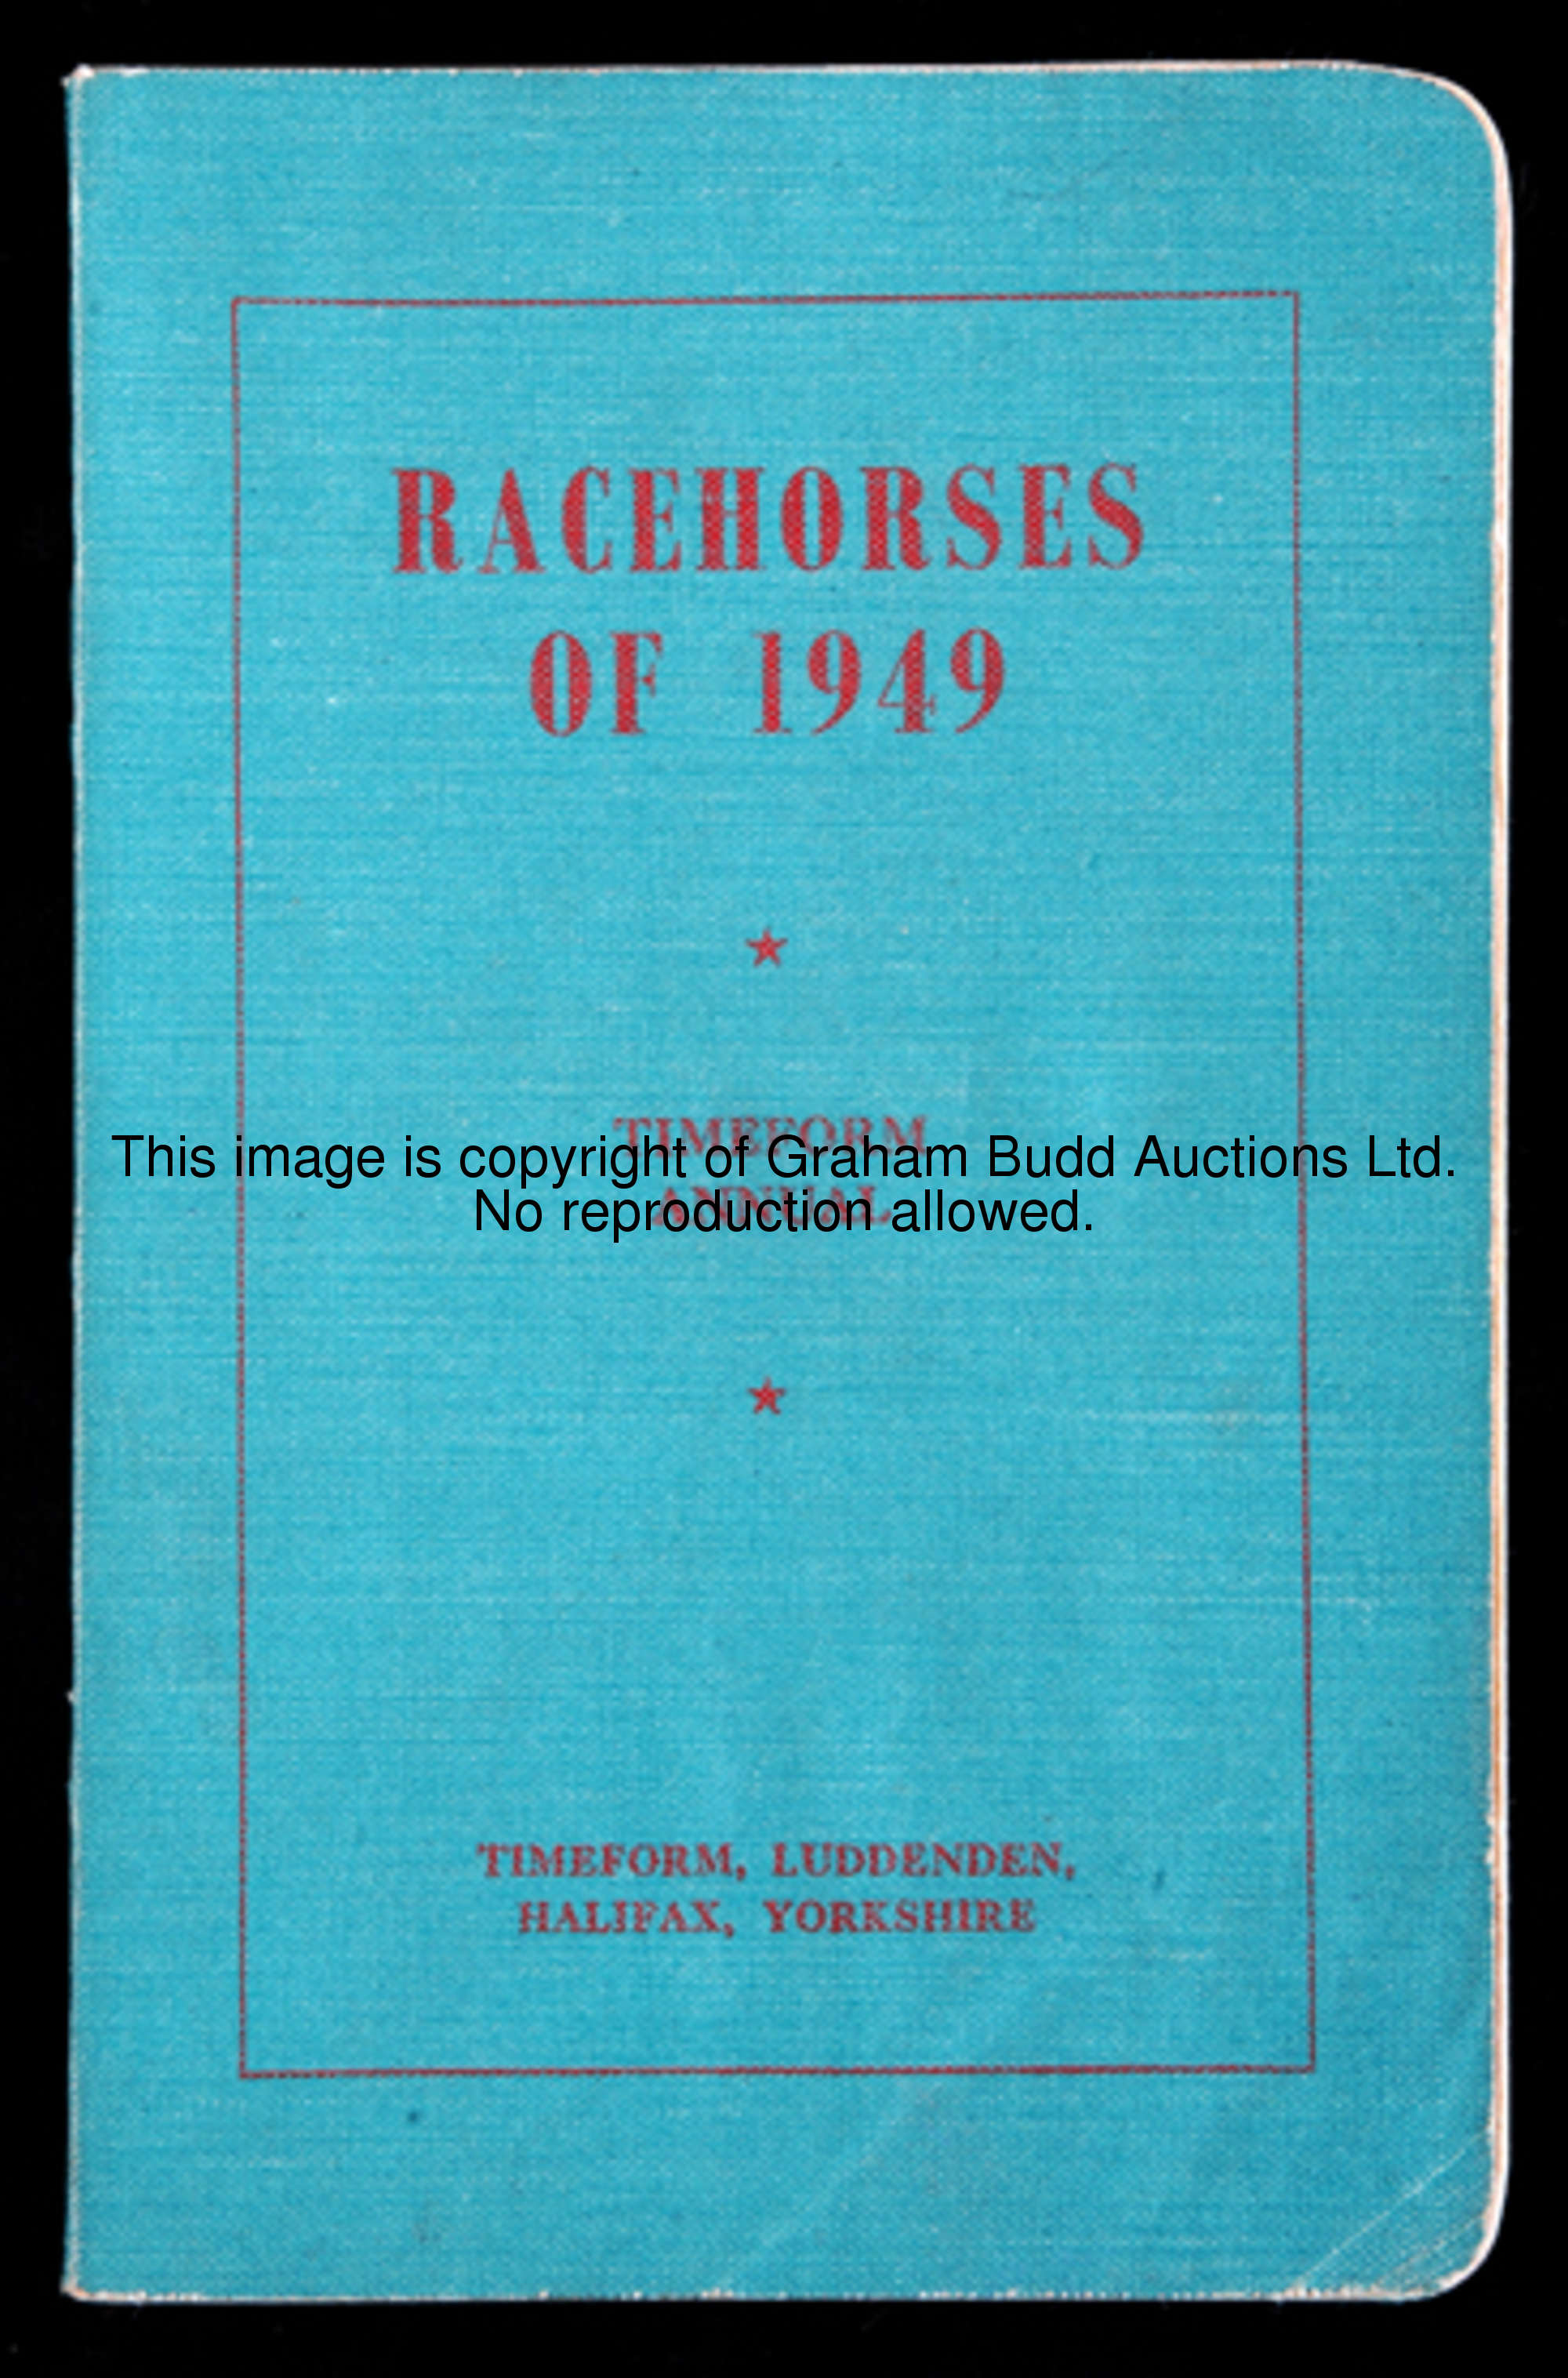 Timeform Racehorses of 1949, edited by Phil Bull, the very rare softback edition in green limp cloth...